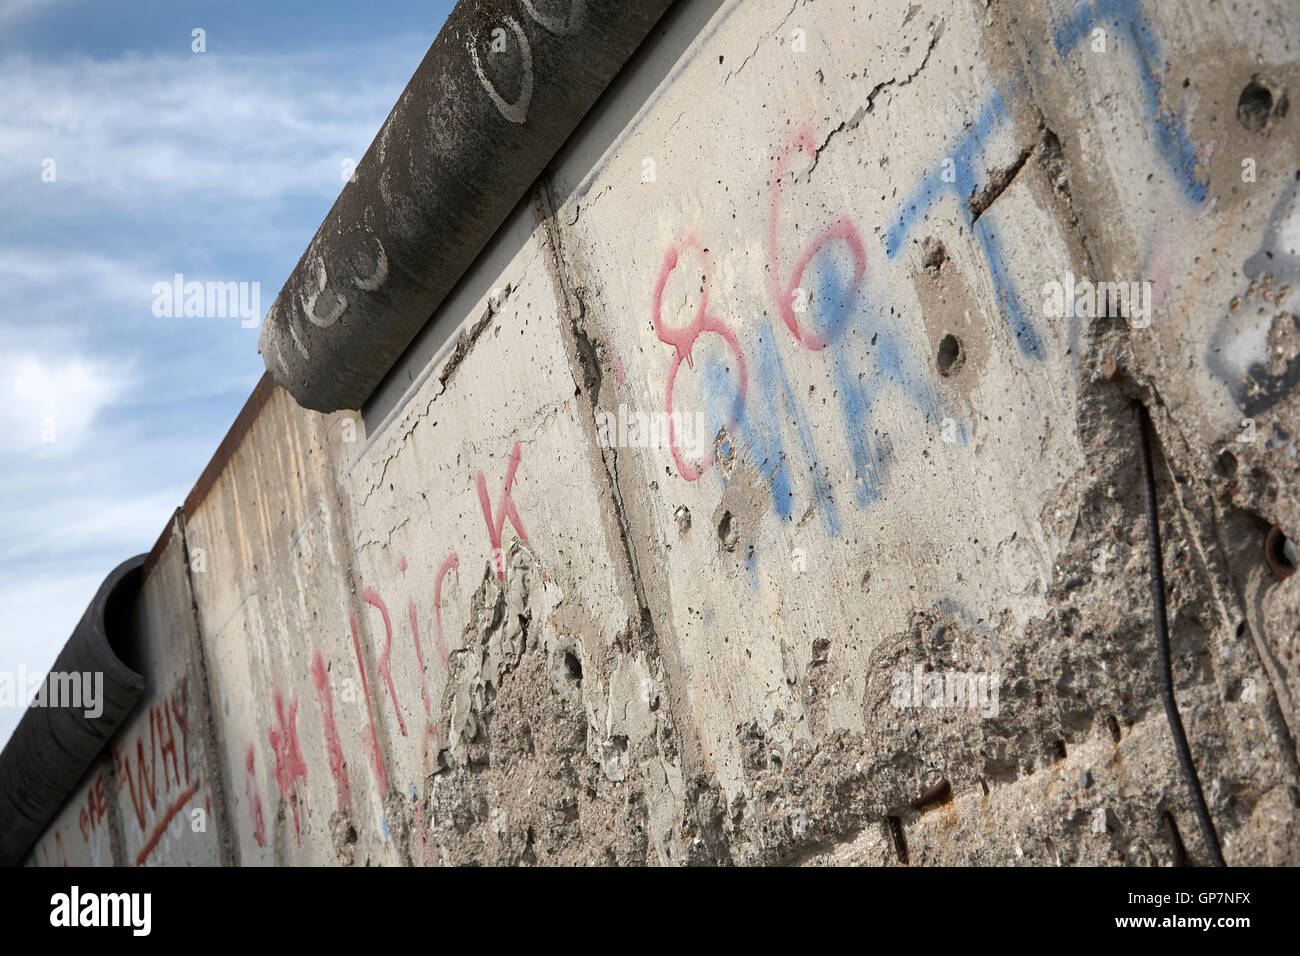 Remains of the decaying Berlin Wall Stock Photo